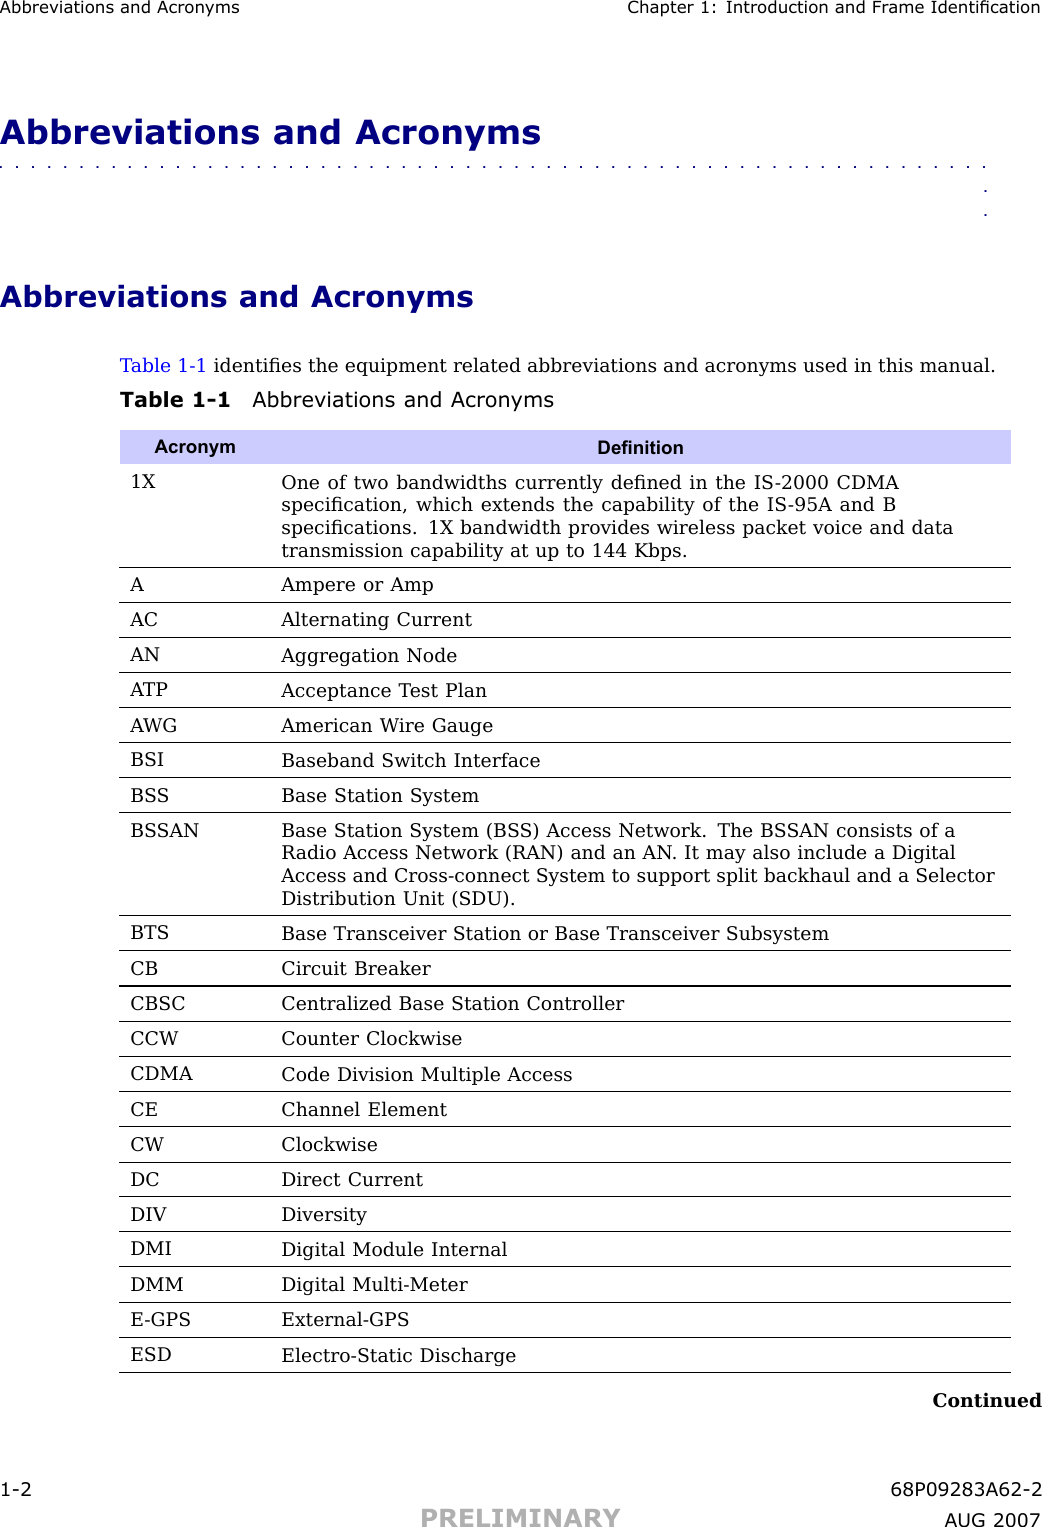 Abbreviations and Acron yms Chapter 1: Introduction and Fr ame IdenticationAbbreviations and Acronyms■■■■■■■■■■■■■■■■■■■■■■■■■■■■■■■■■■■■■■■■■■■■■■■■■■■■■■■■■■■■■■■■Abbreviations and AcronymsT able 1 -1 identiﬁes the equipment related abbreviations and acronyms used in this manual.Table 1 -1 Abbreviations and Acron ymsAcronymDenition1XOne of two bandwidths currently deﬁned in the IS -2000 CDMAspeciﬁcation, which extends the capability of the IS -95A and Bspeciﬁcations. 1X bandwidth provides wireless packet voice and datatransmission capability at up to 144 Kbps.A Ampere or AmpACAlternating CurrentANAggregation NodeA TPAcceptance T est PlanA WG American W ire GaugeBSIBaseband Switch InterfaceBS S Base Station SystemBS SANBase Station System (BS S) Access Network. The BS SAN consists of aR adio Access Network (RAN) and an AN . It may also include a DigitalAccess and Cross-connect System to support split backhaul and a SelectorDistribution Unit (SDU).BTSBase Transceiver Station or Base Transceiver SubsystemCBCircuit BreakerCBSCCentralized Base Station ControllerCCWCounter ClockwiseCDMACode Division Multiple AccessCEChannel ElementCWClockwiseDC Direct CurrentDIVDiversityDMIDigital Module InternalDMMDigital Multi-MeterE -GPSExternal-GPSESDElectro-Static DischargeContinued1 -2 68P09283A62 -2PRELIMINARY A UG 2007